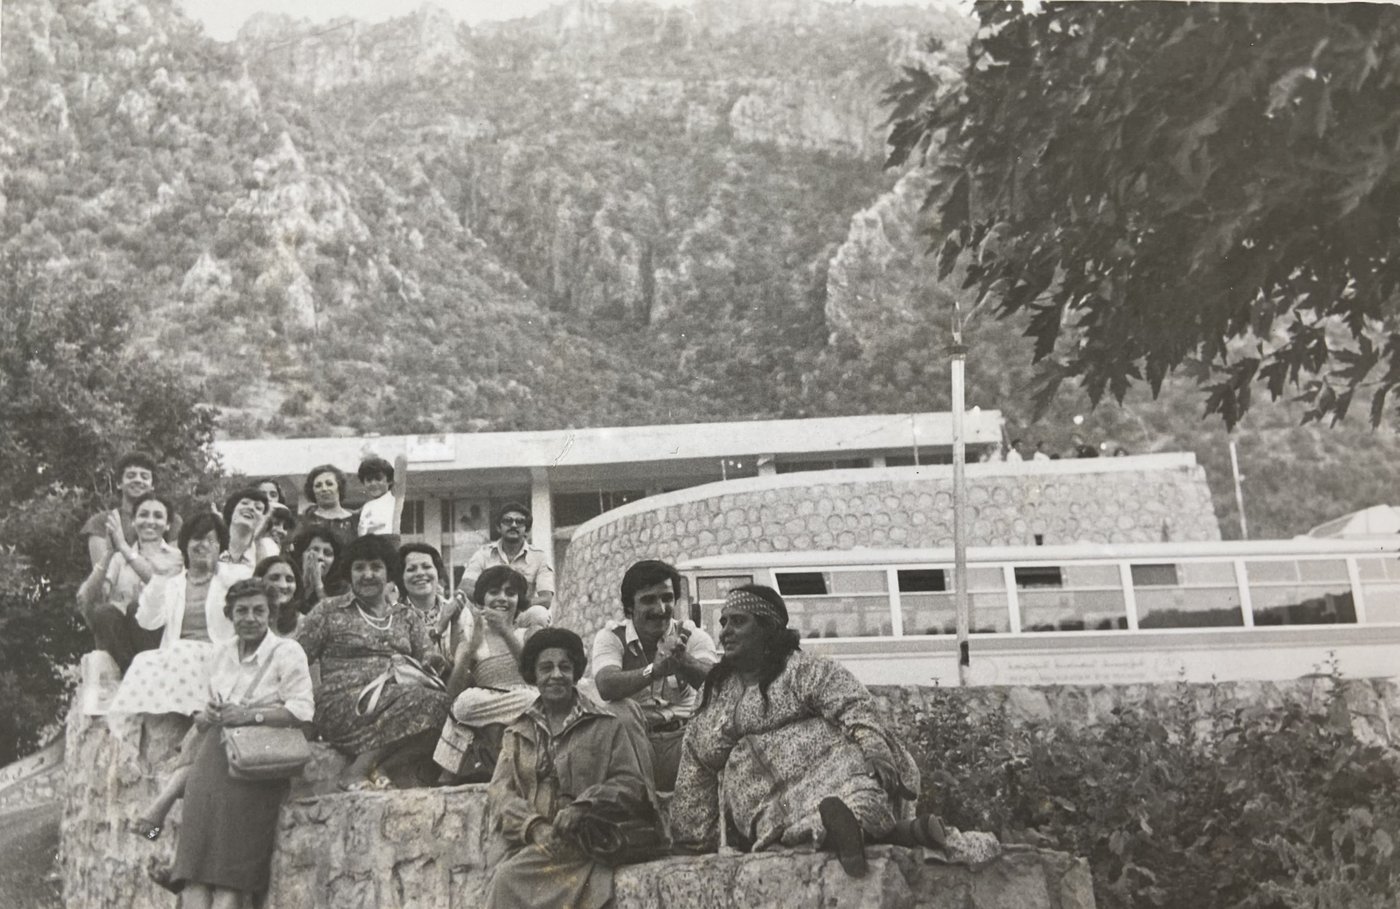 Black and white photo, group photo, people on stone wall/steps, mountains in the background